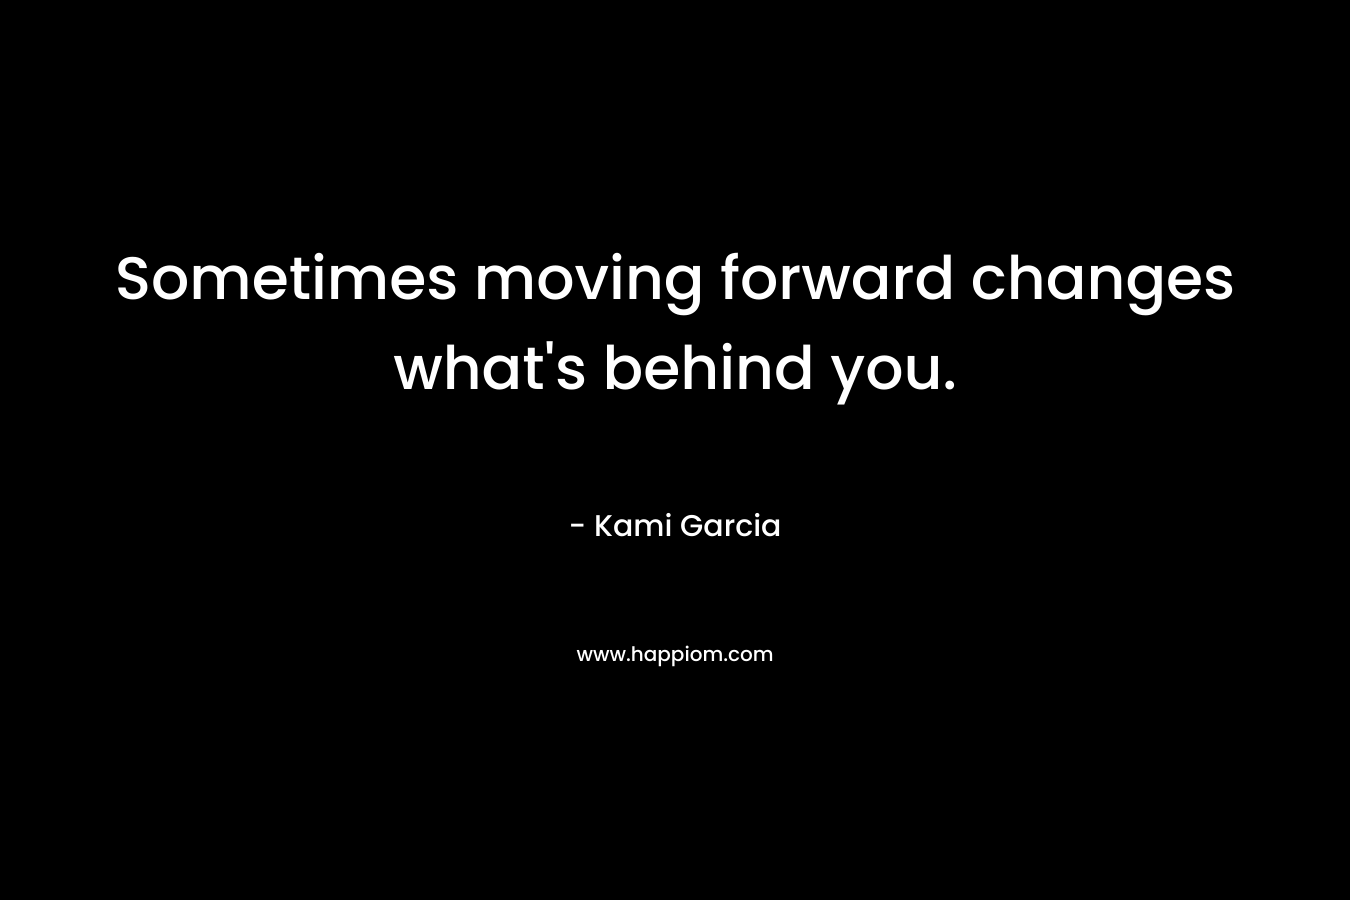 Sometimes moving forward changes what's behind you.